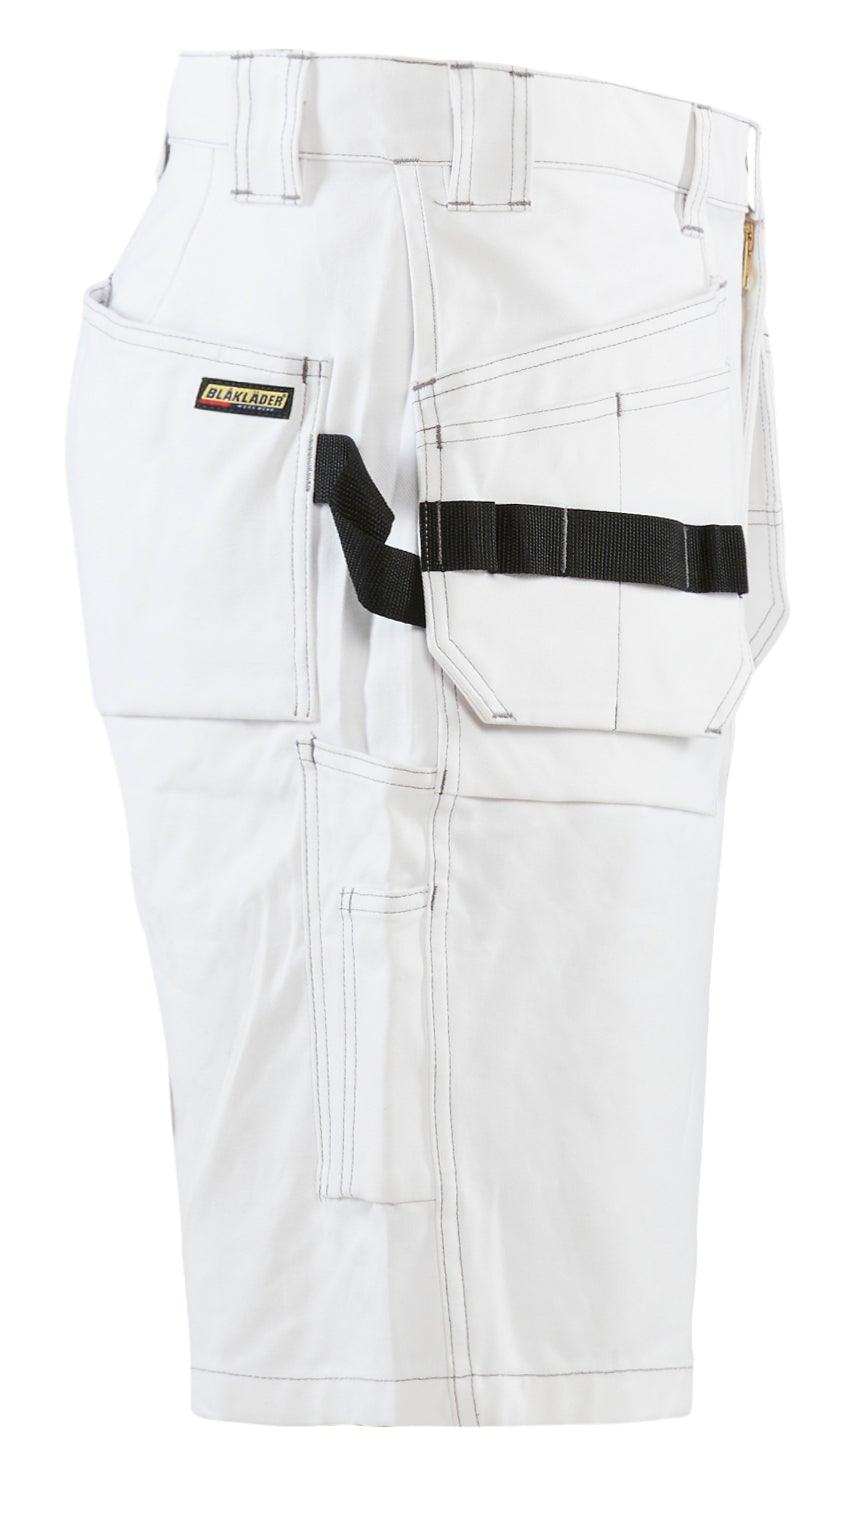 Blaklader 1634 8oz Painter Shorts with Utility Pockets - White - Trusted Gear Company LLC